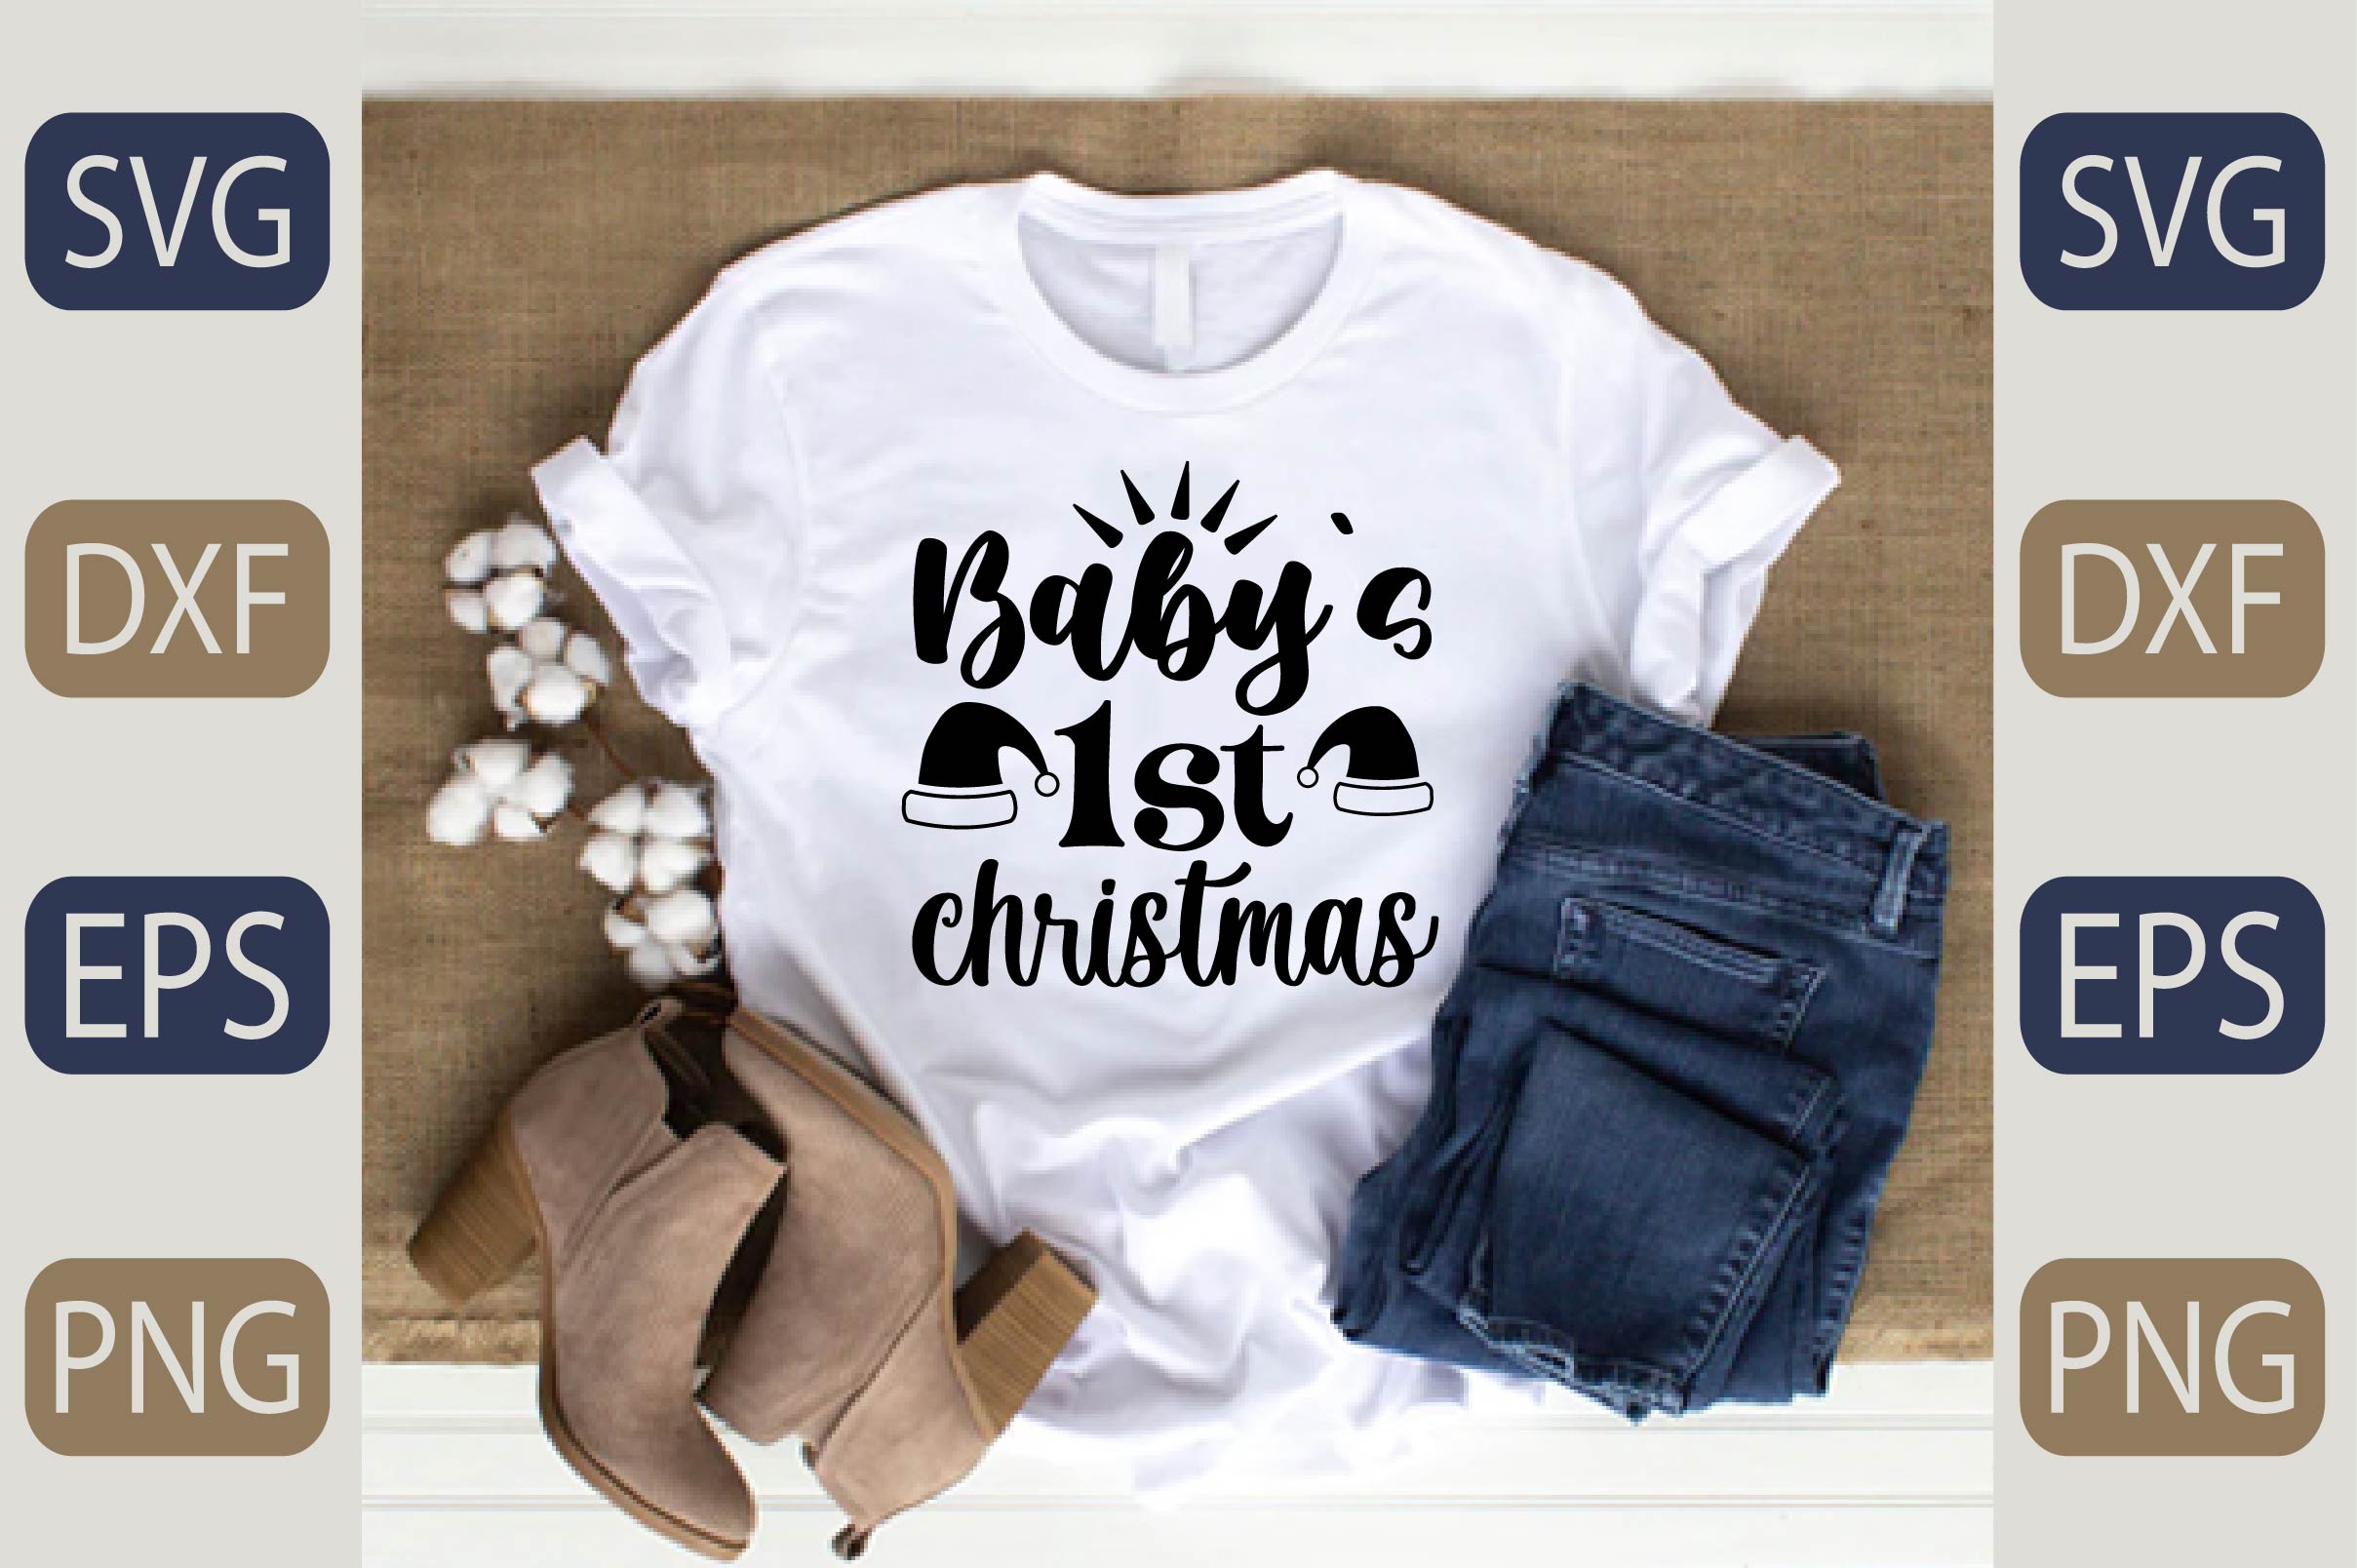 T - shirt that says baby's 1st christmas.